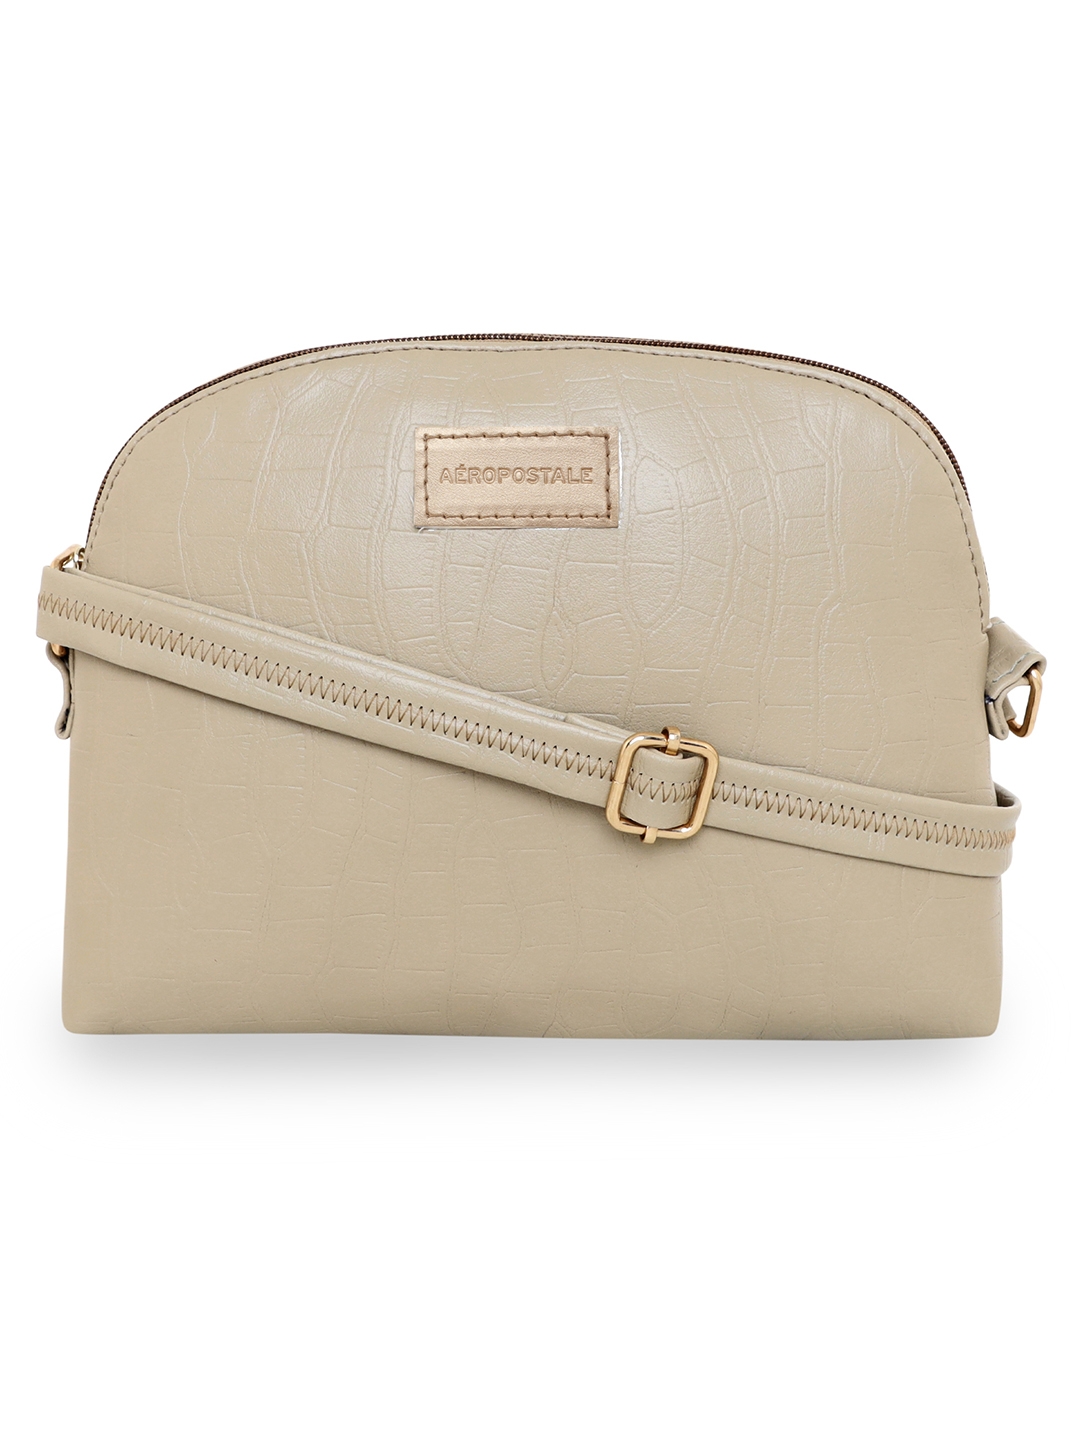 Aeropostale Textured Kylie PU Sling Bag with non-detachable strap (Beige)